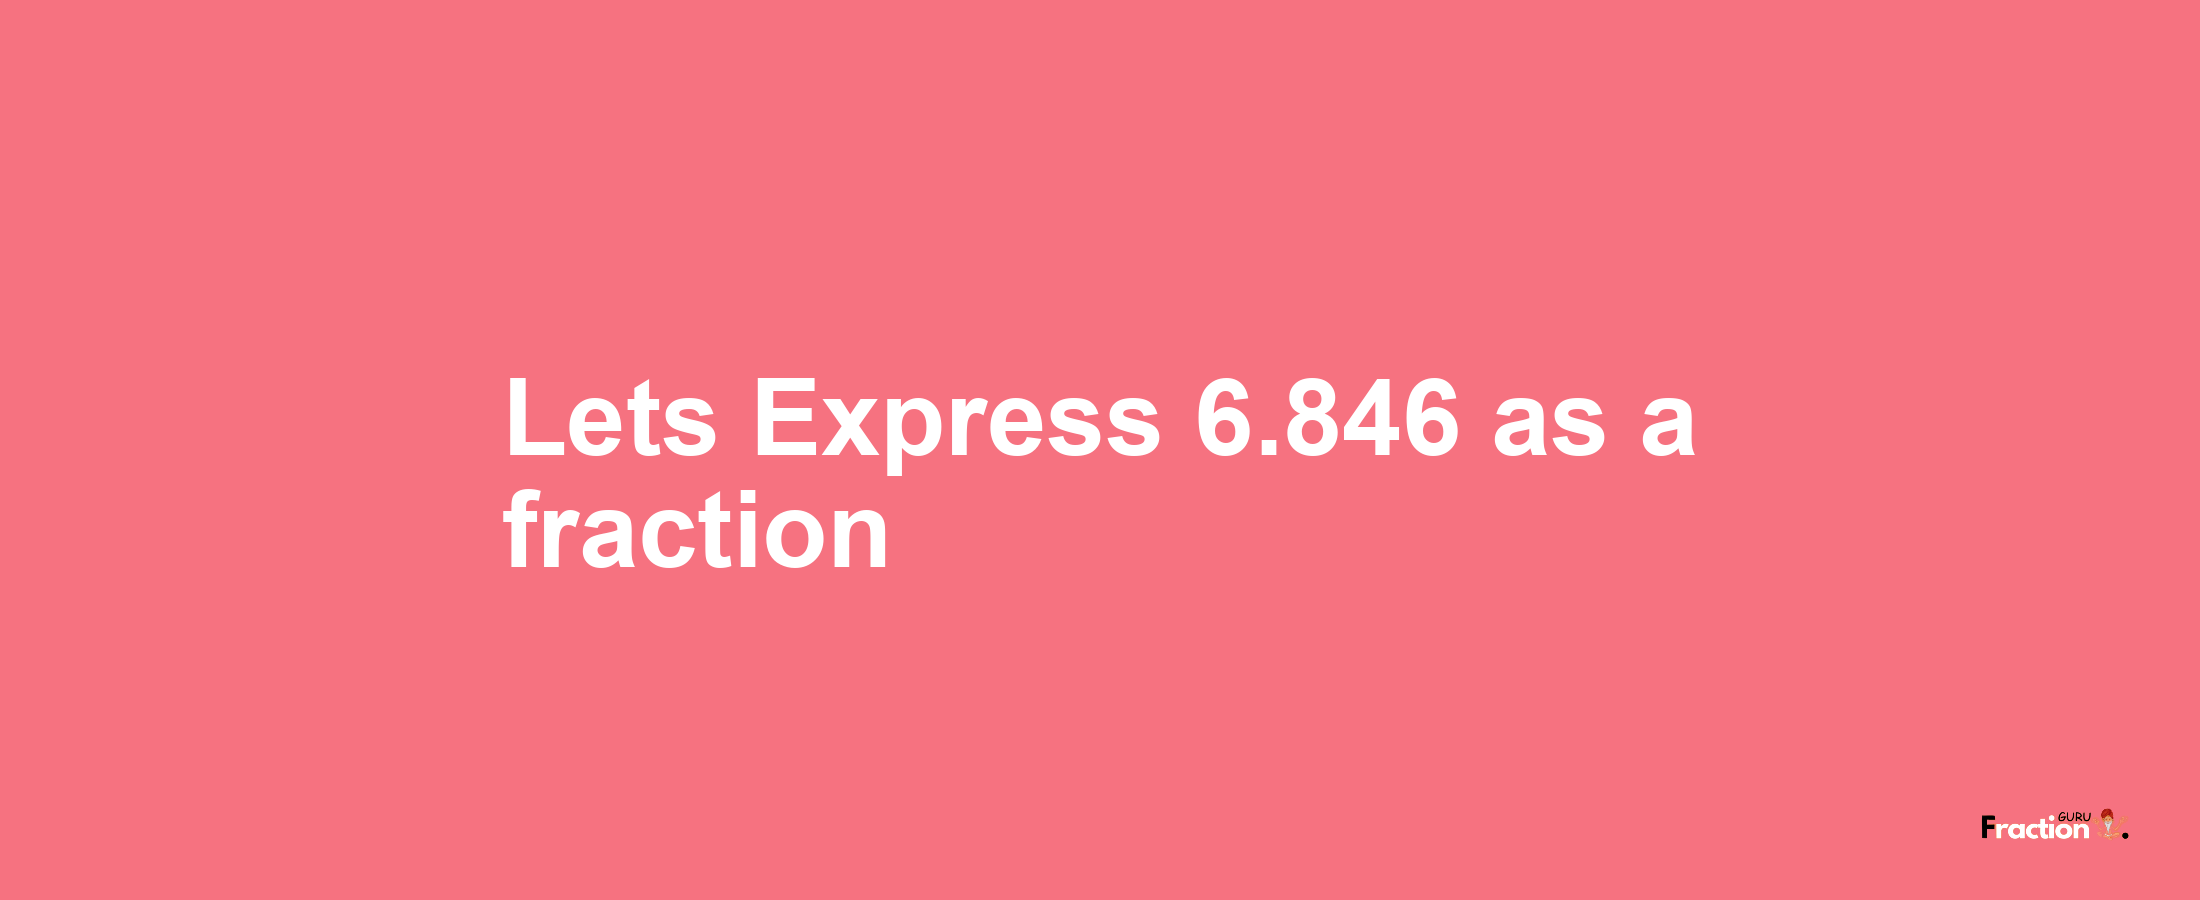 Lets Express 6.846 as afraction